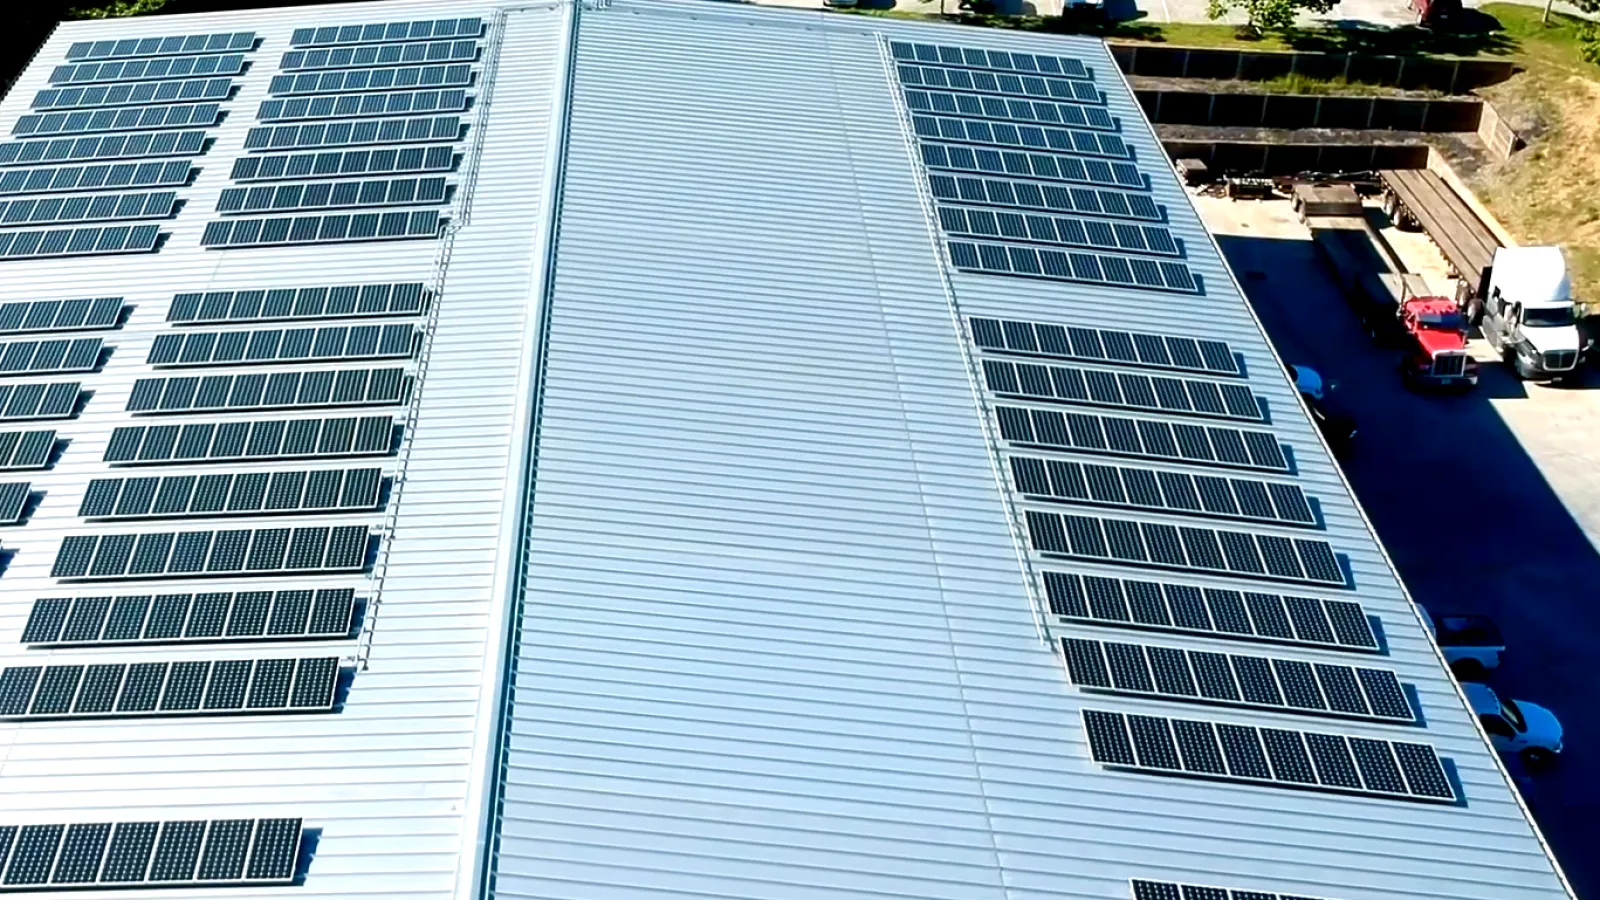 Cantsink solar power manufacturing plant